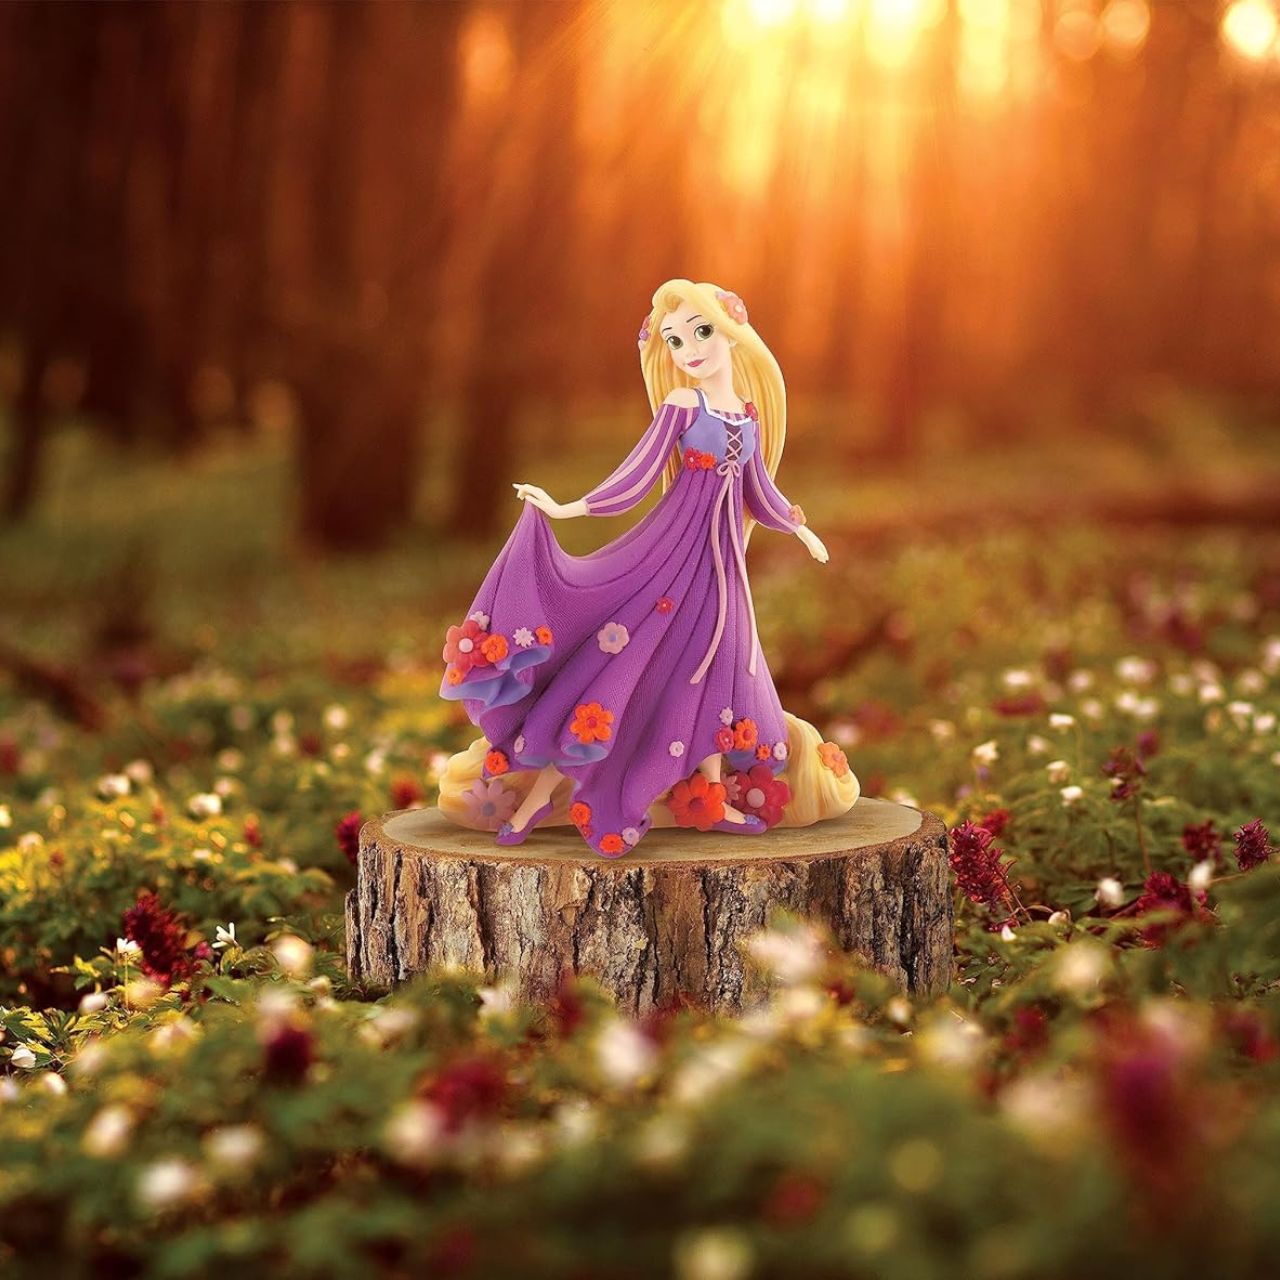 Disney Showcase shows a stunning new Botanical collection with Disney legends surrounded in 3D sculpted florals. No detail is overlooked, from a textured dress to sculpted florals, this figurine from Disney' animated film Tangled is made from cast stone.